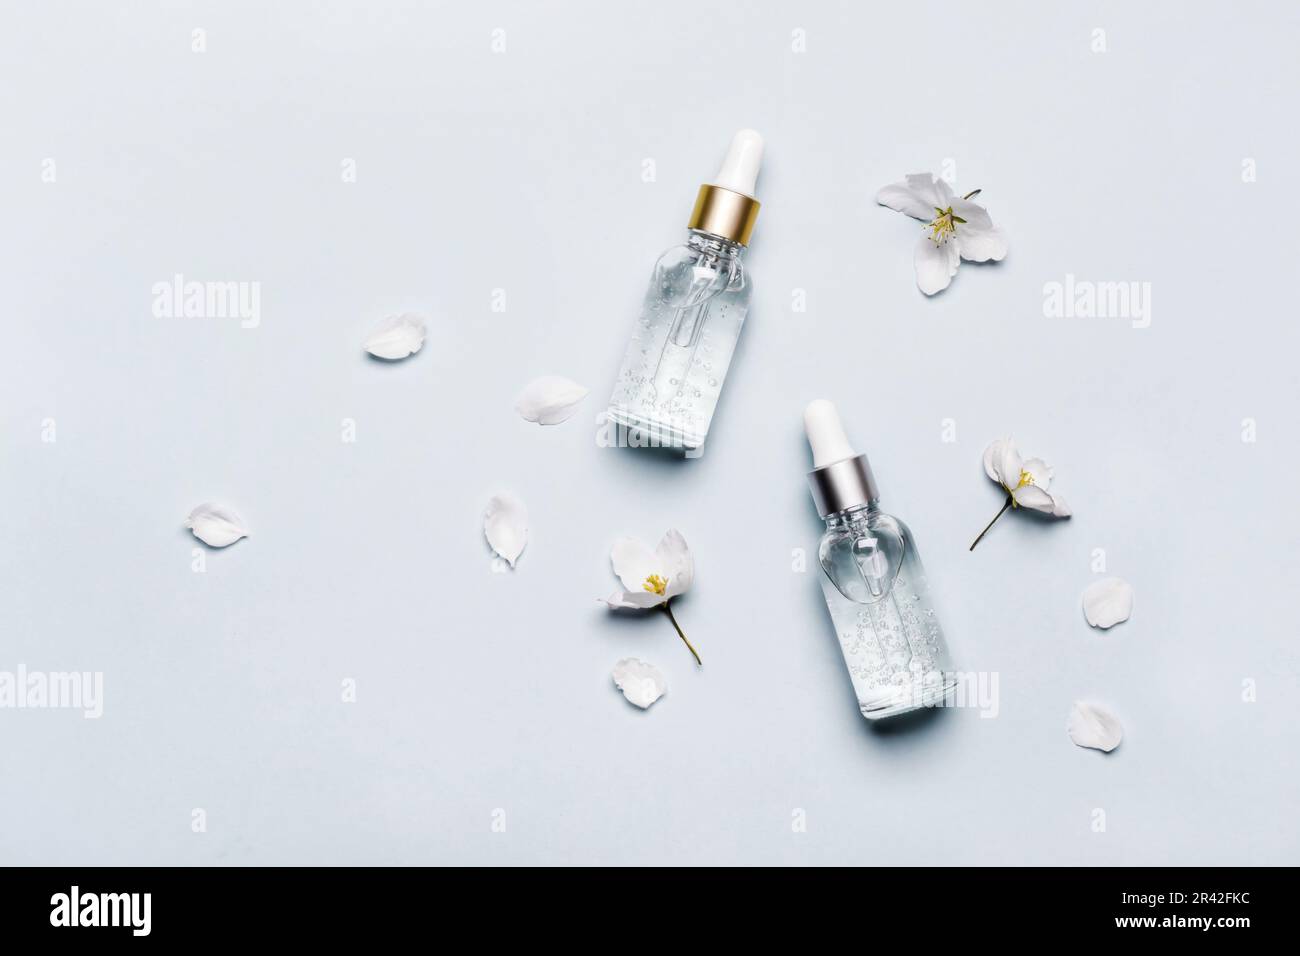 Serum or Liquid Collagen Bottles on pastel blue background. Anti age Cosmetics products concept Stock Photo